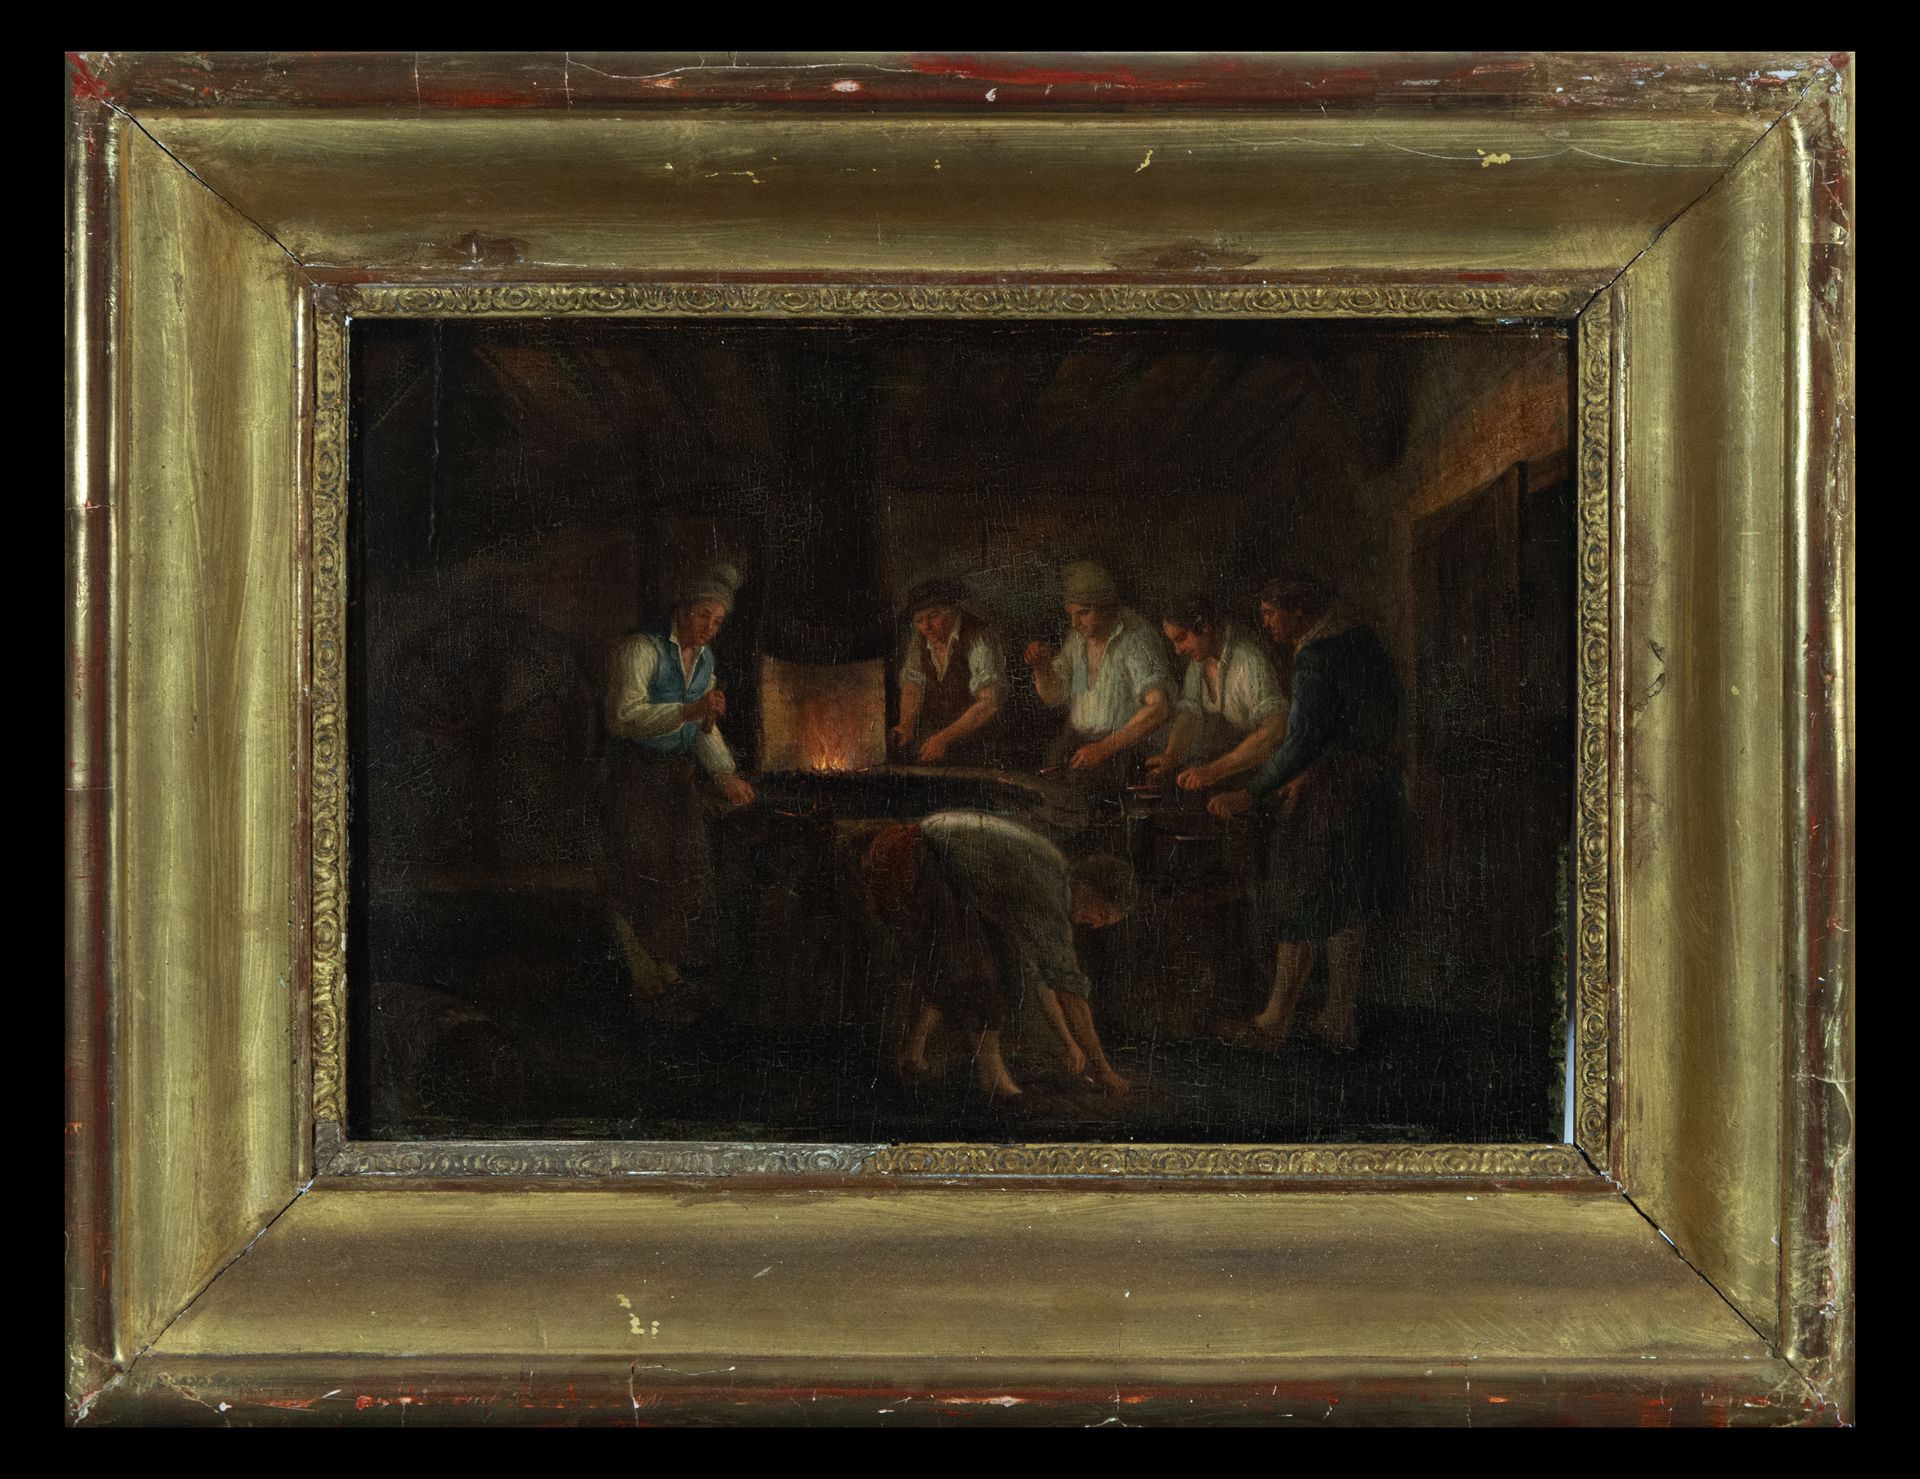 The Forge, Dutch school by David Teniers I from the first quarter of the 17th century